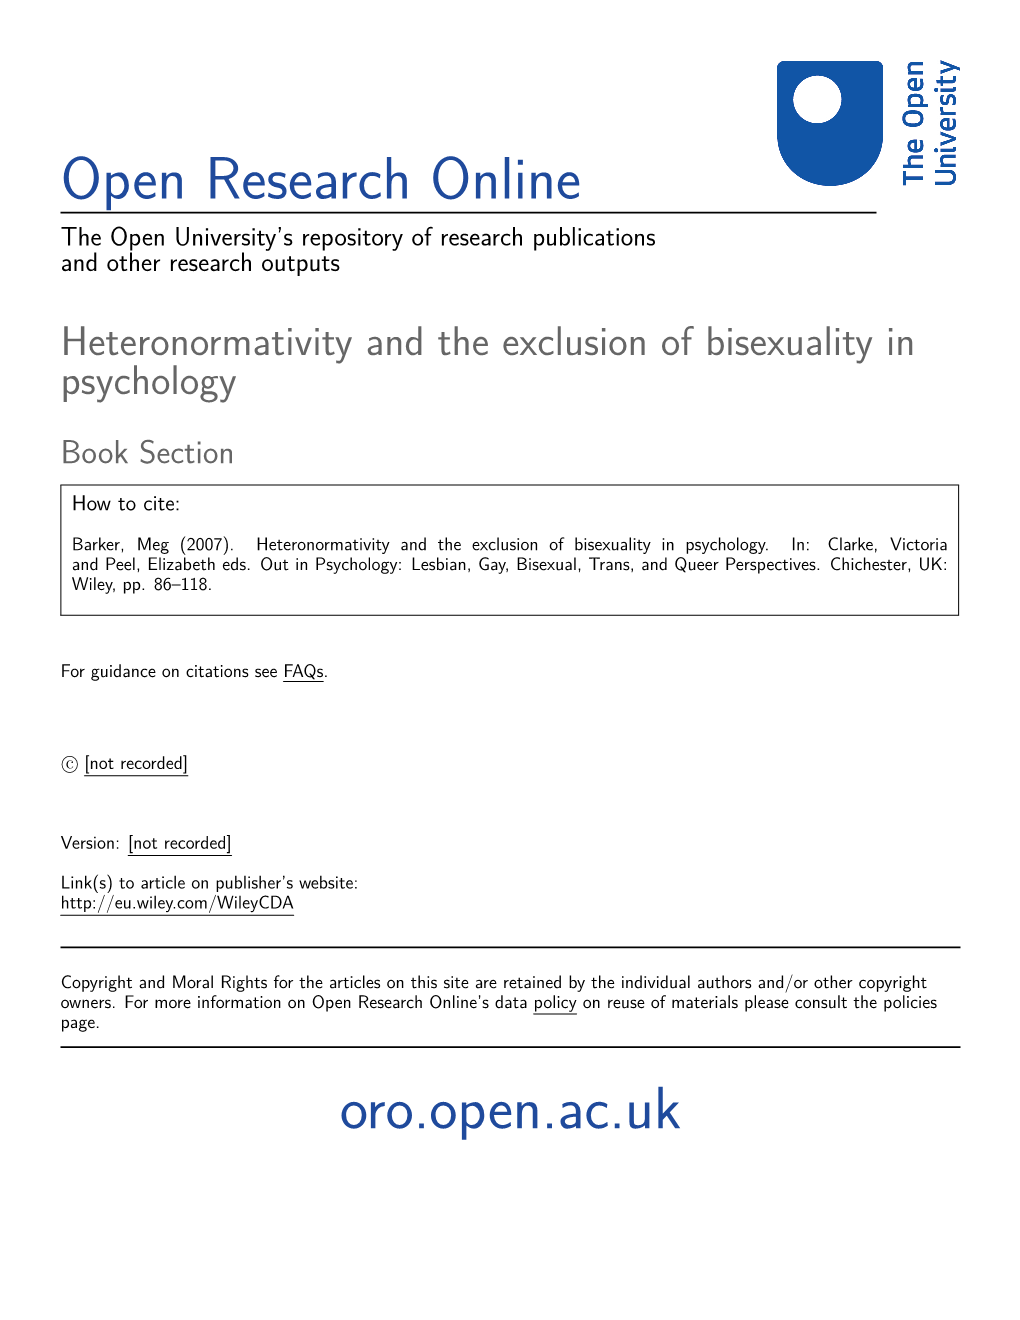 Heteronormativity and the Exclusion of Bisexuality in Psychology